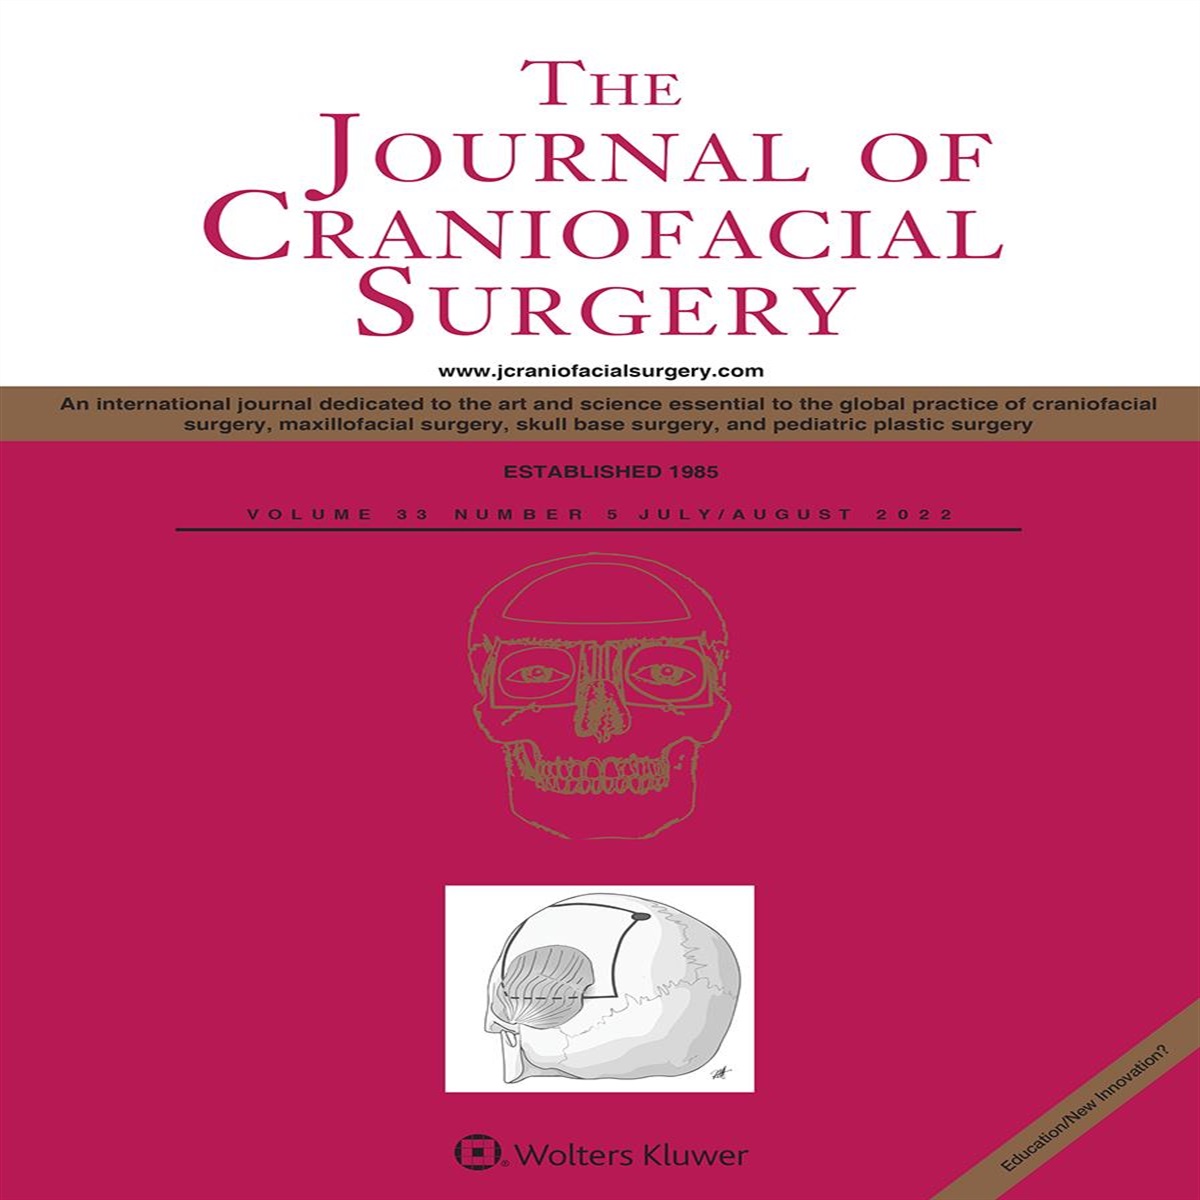 The Effects of Preoperative Administration of Erythropoietin in Pediatric Patients Undergoing Cranial Vault Remodeling for Craniosynostosis